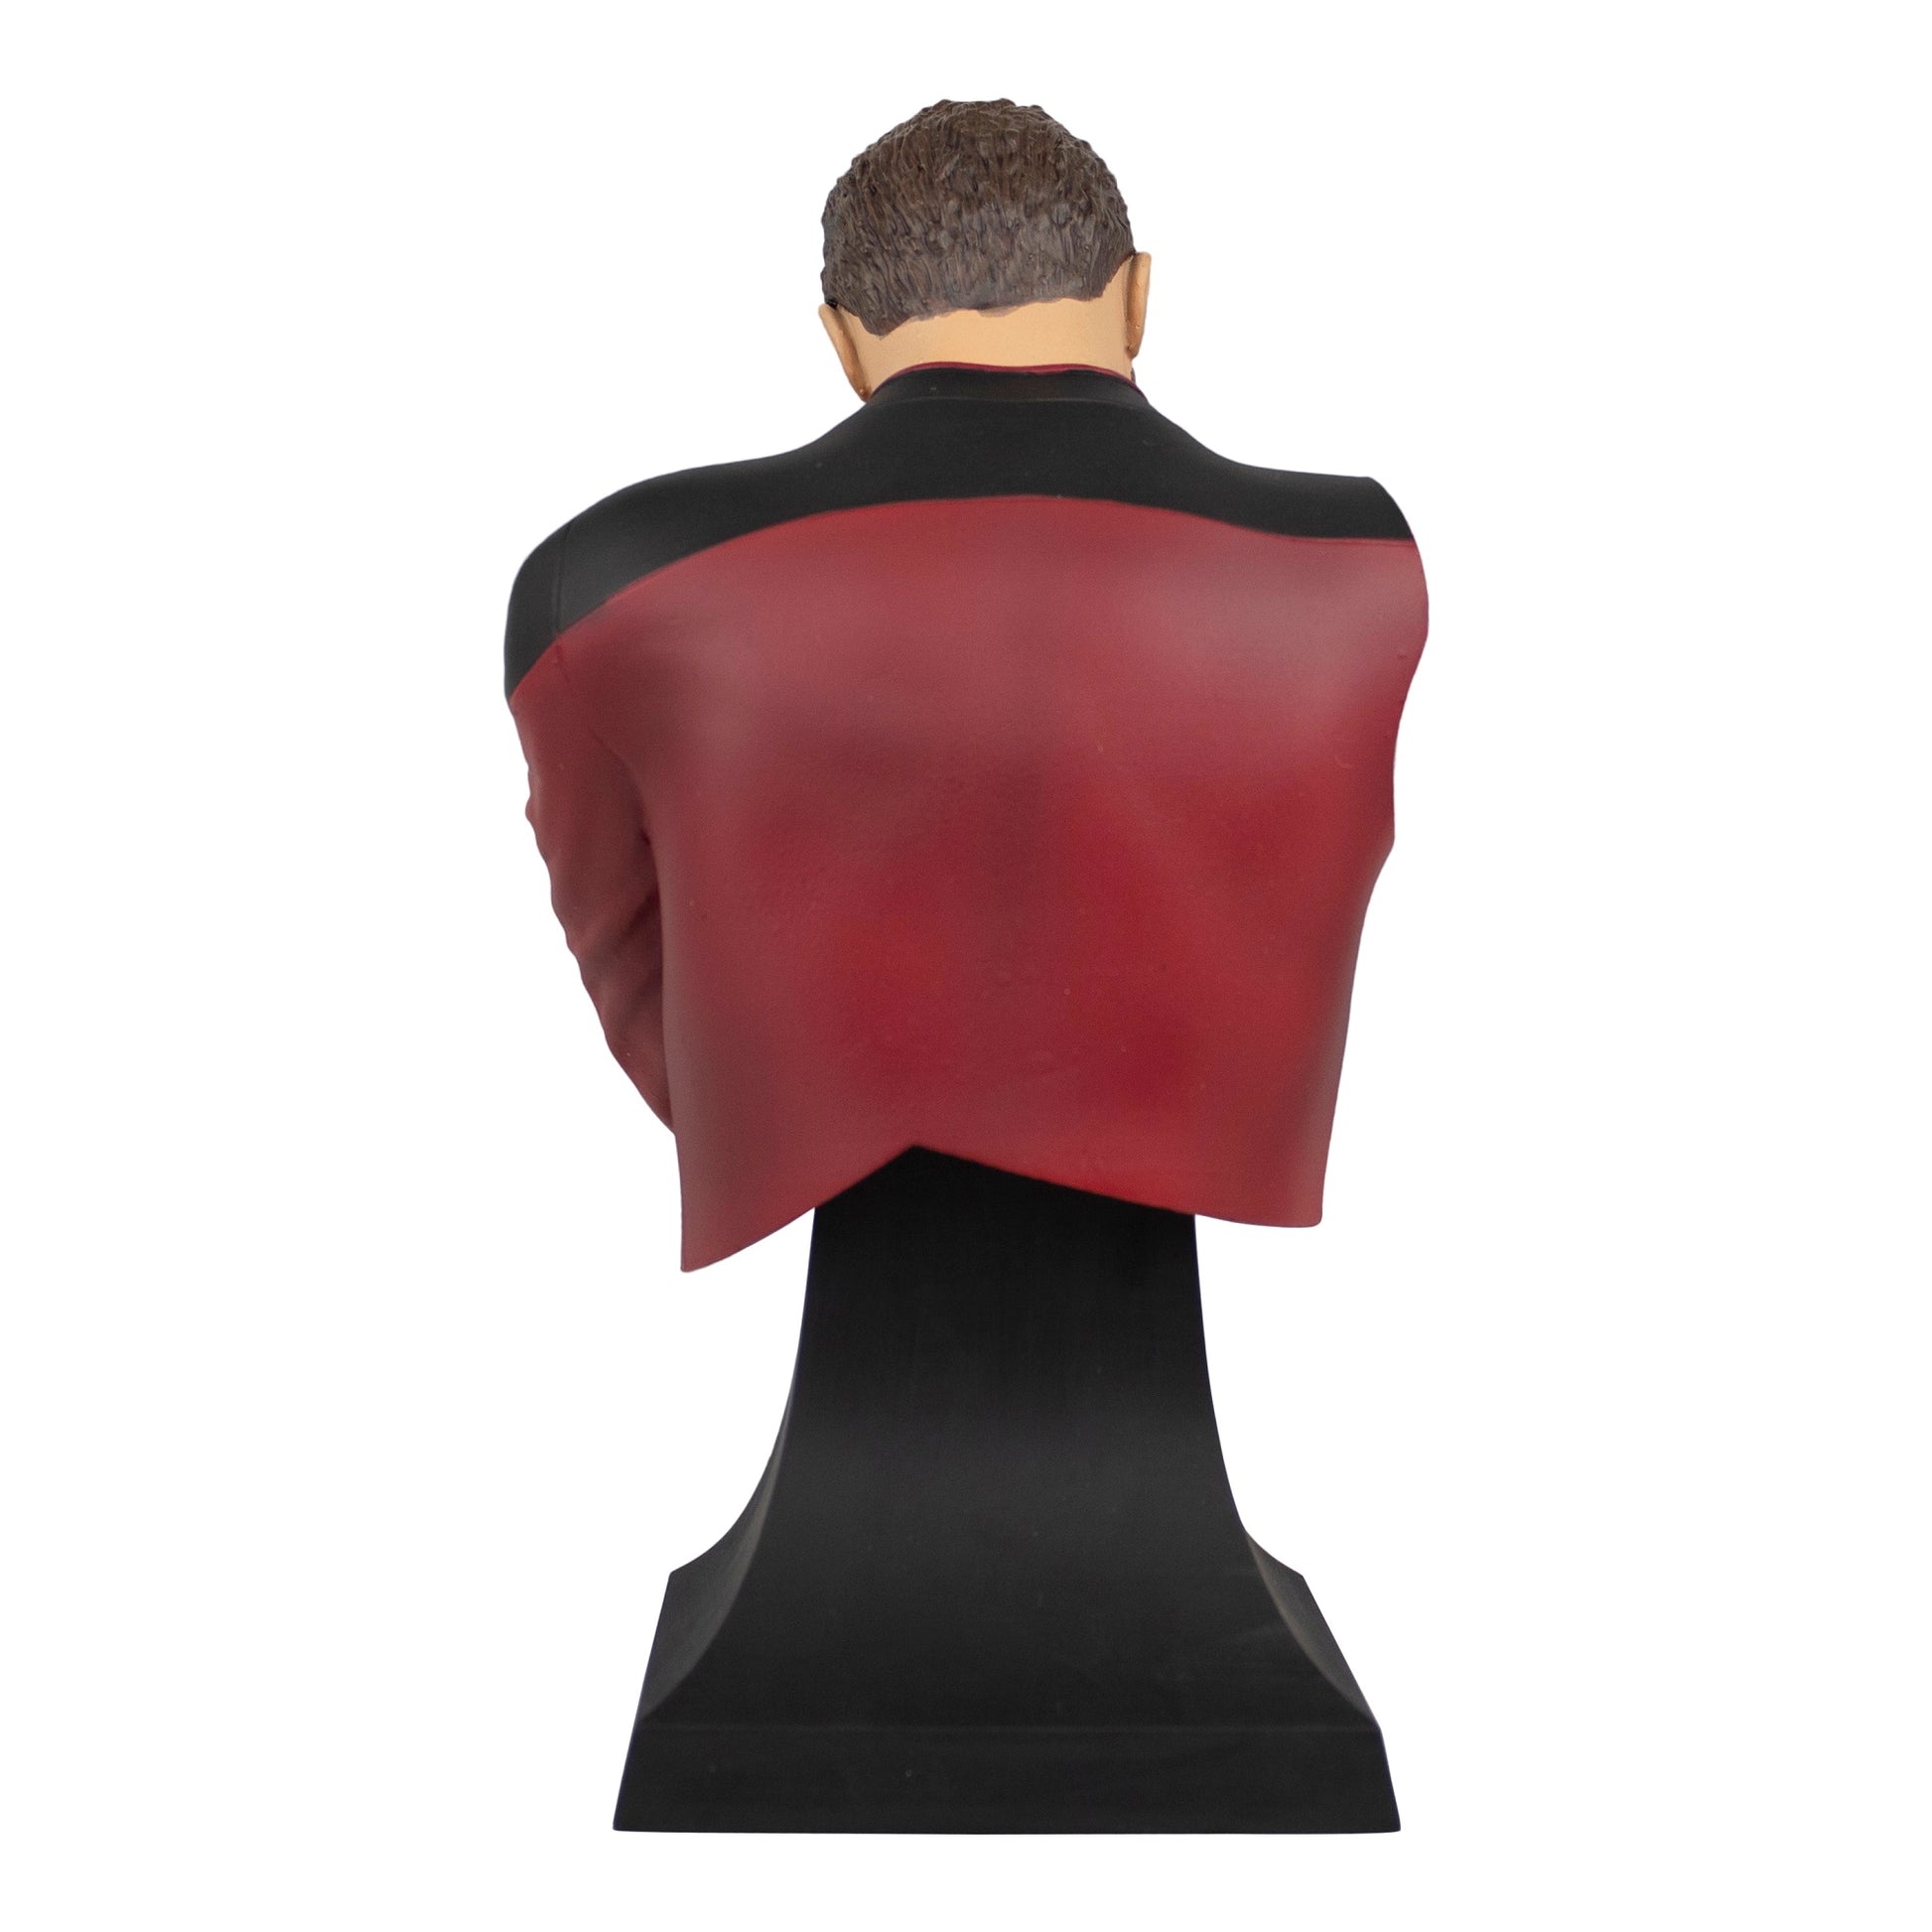 Star Trek The Next Generation Commander Riker Facepalm Bust Paperweight Exclusive - Icon Heroes 